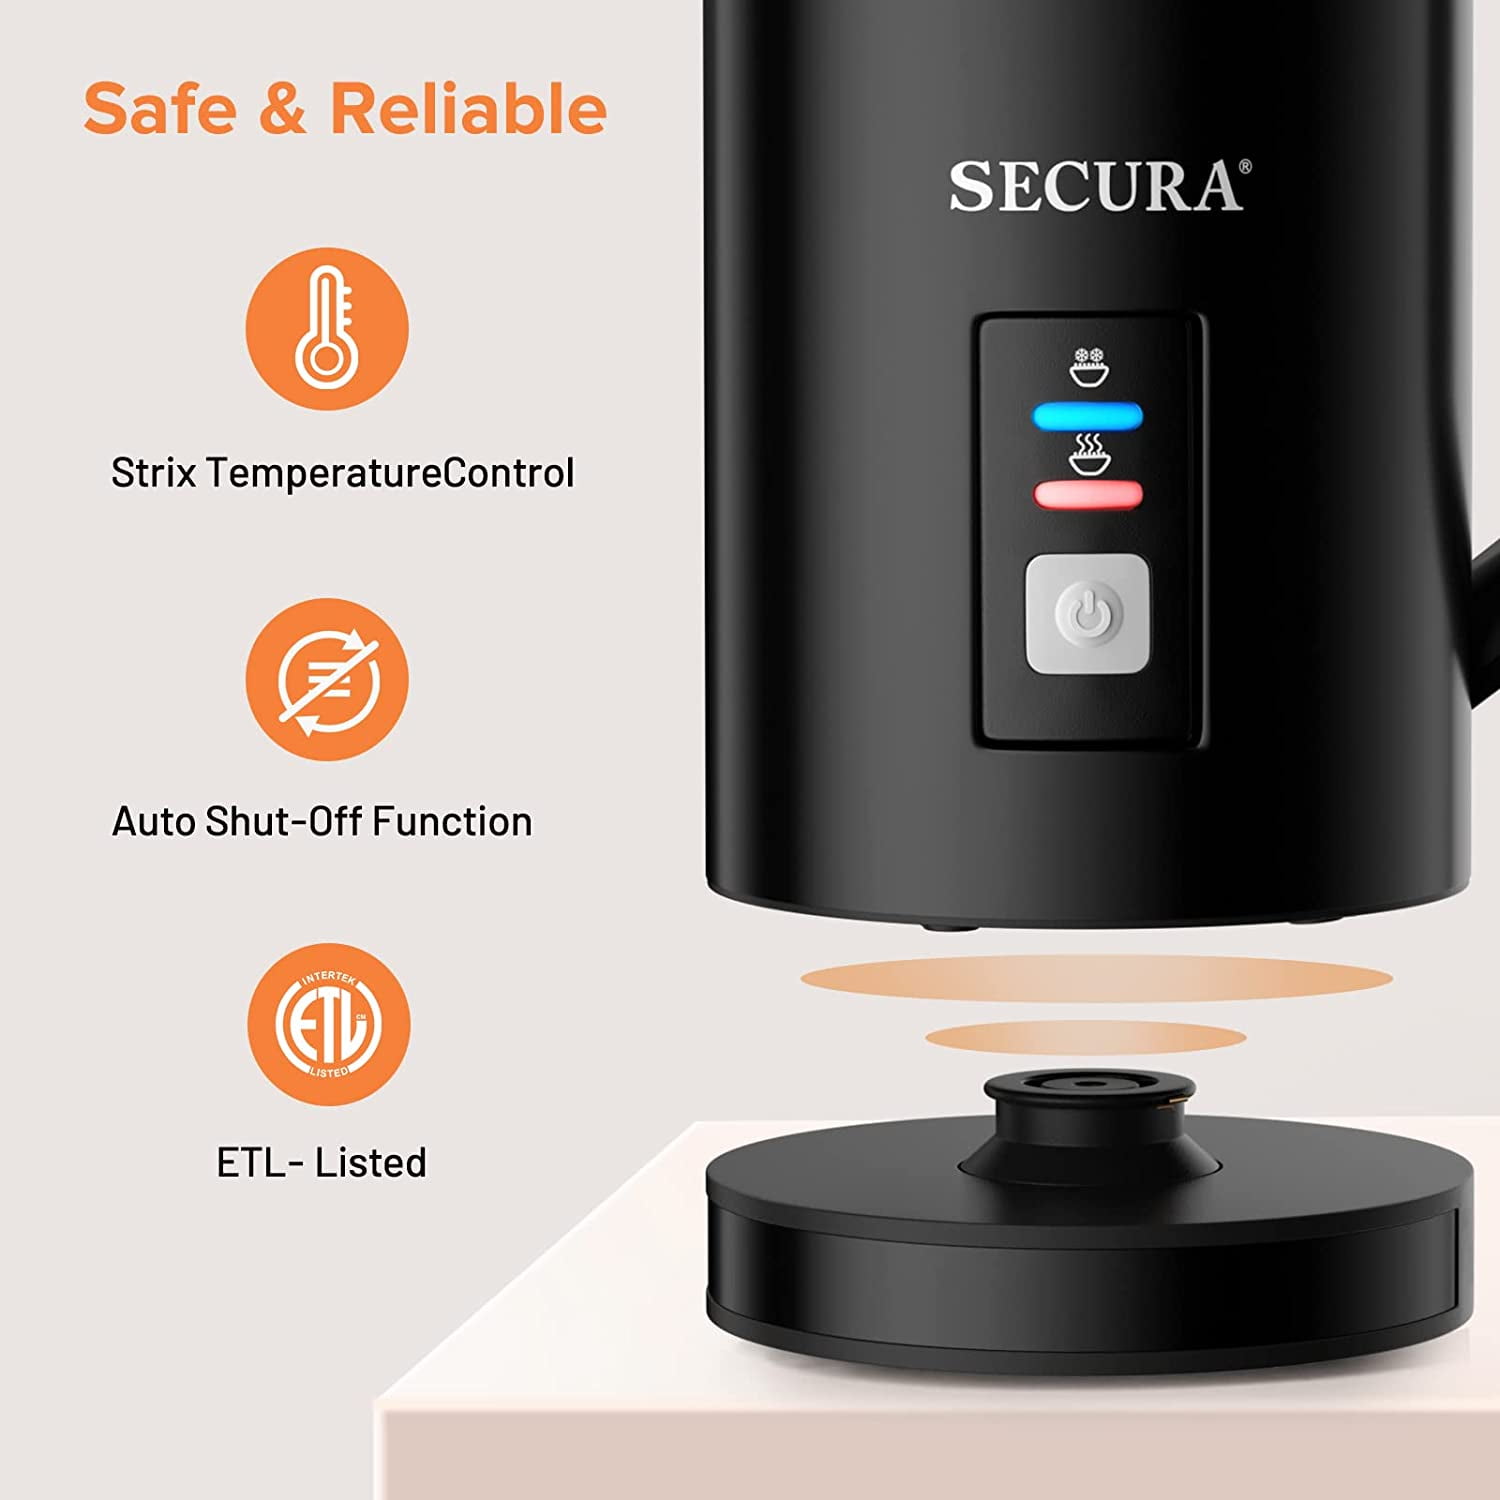 Secura Automatic Milk Frother and Warmer Review